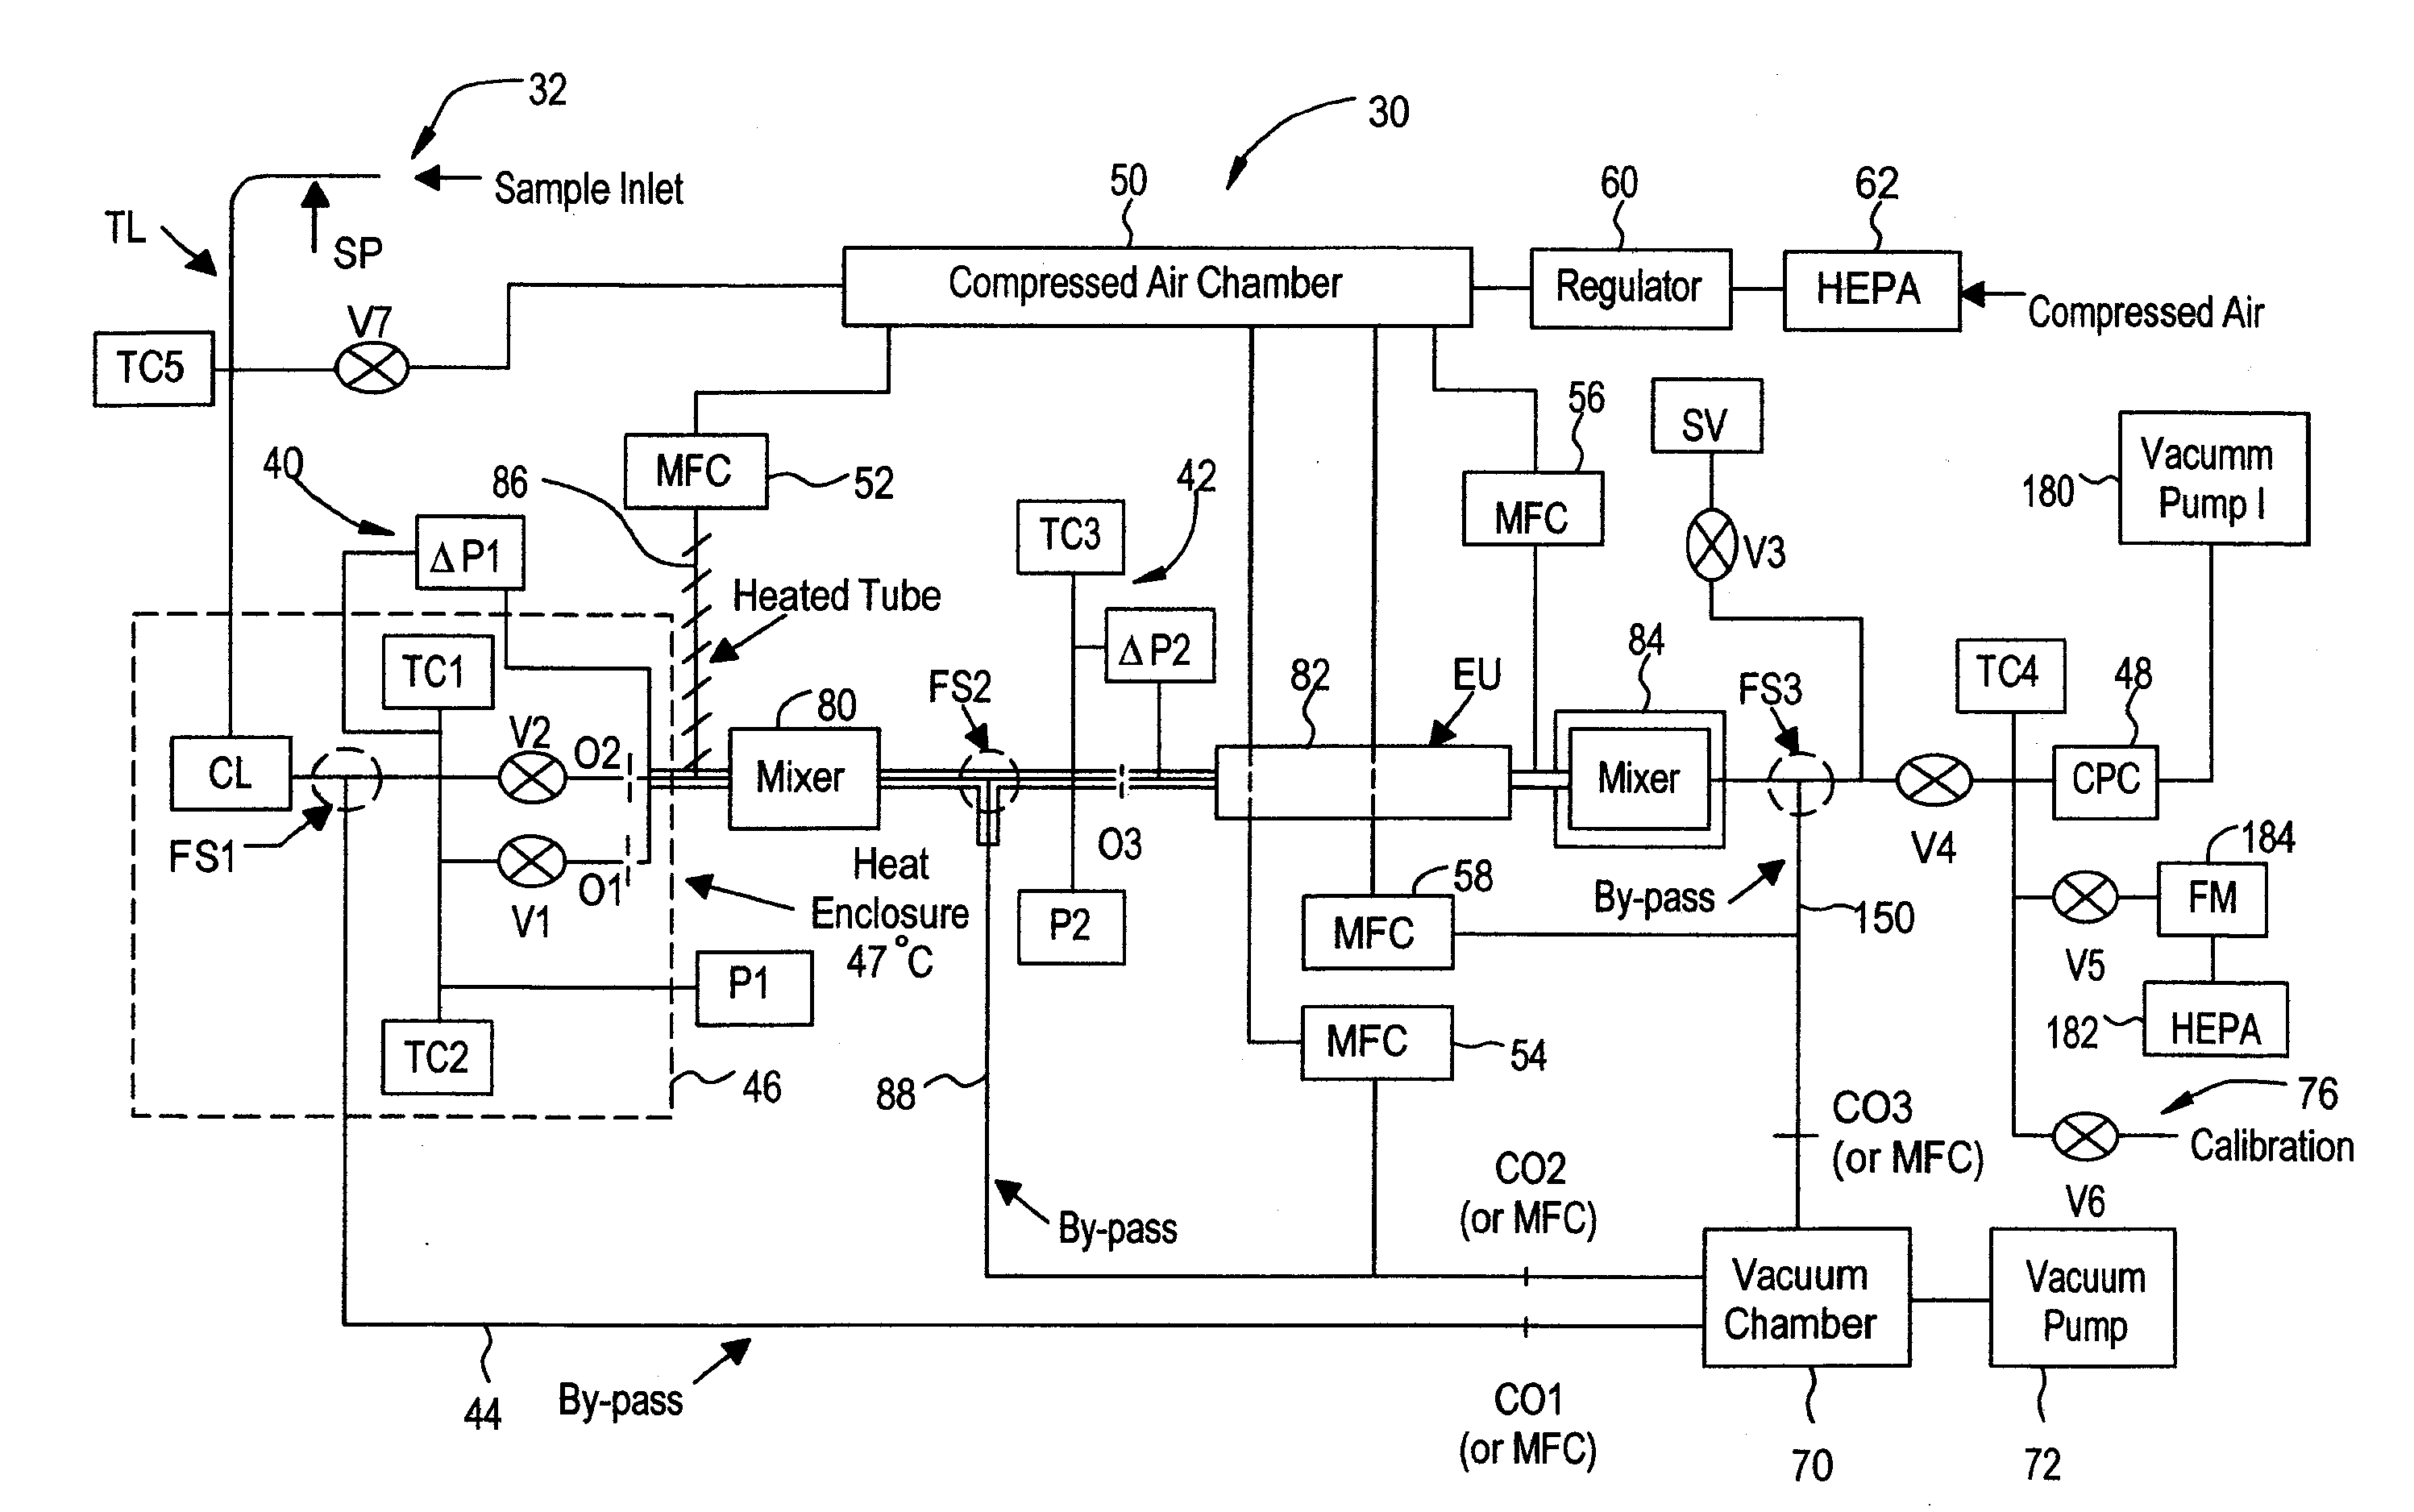 Solid particle counting system with valve to allow reduction of pressure pulse at particle counter when vacuum pump is started